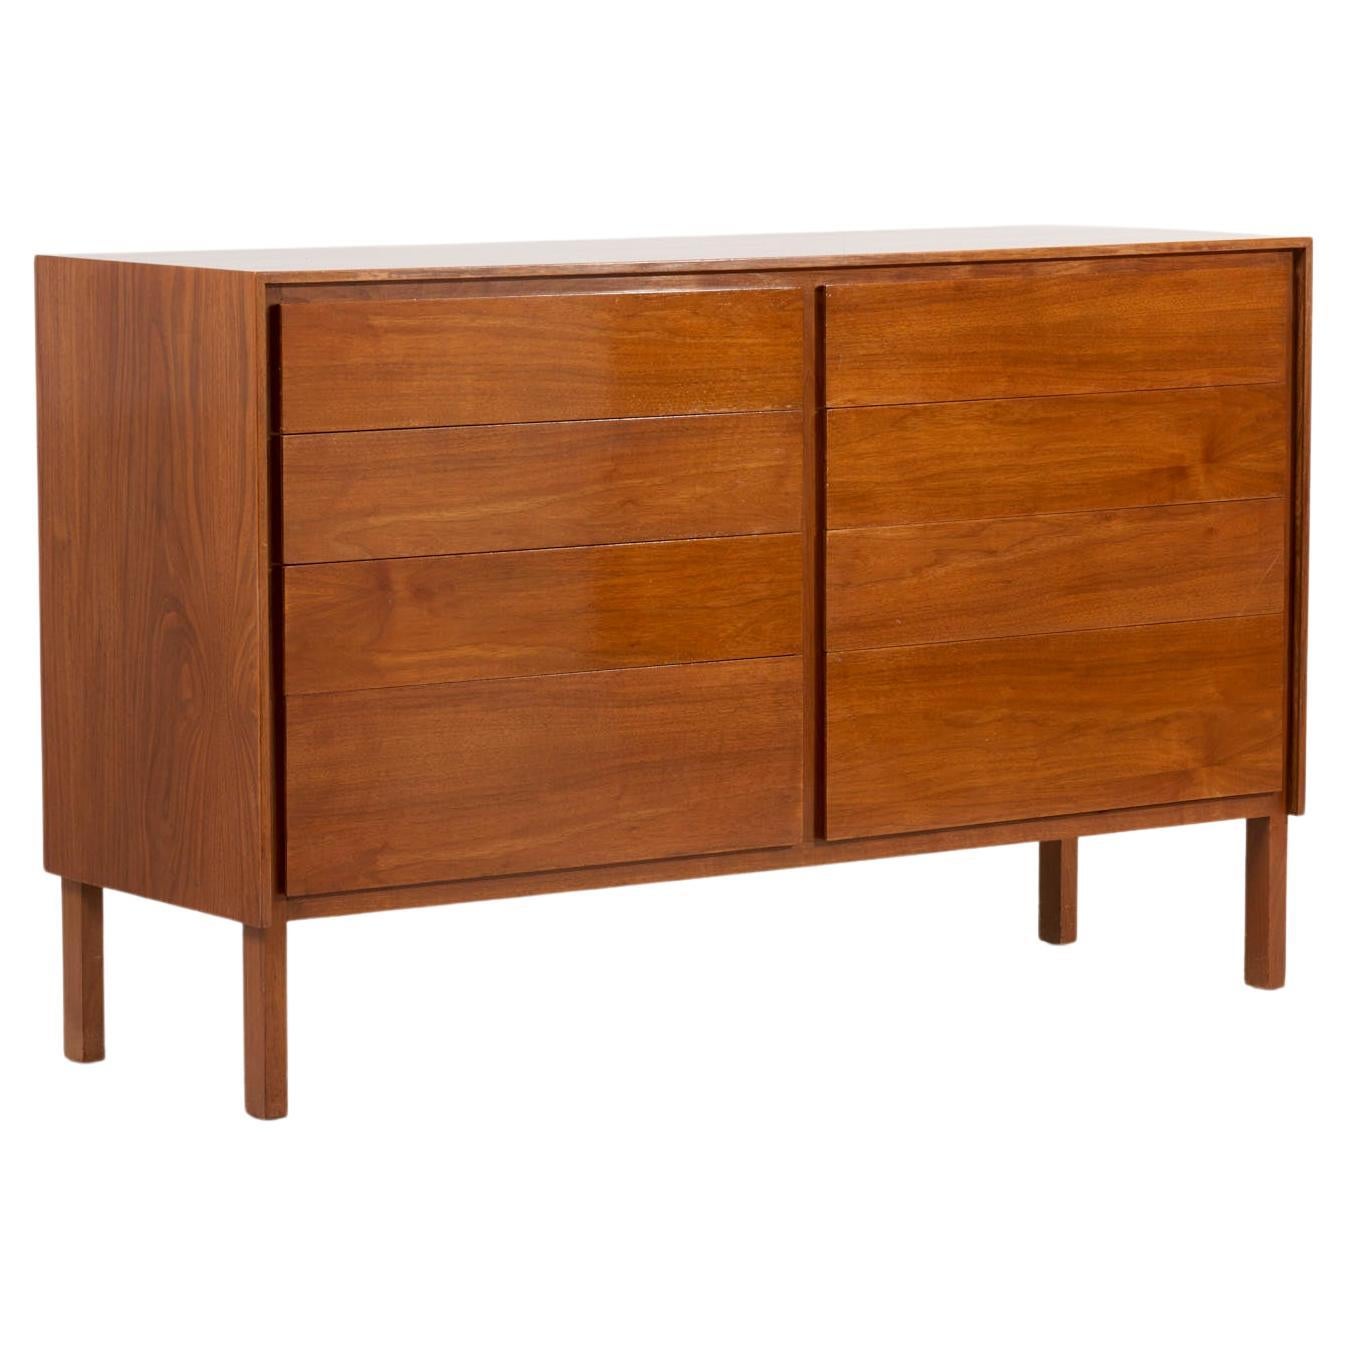 Modernist Sideboard in Walnut by Allan Gould, USA 1960s For Sale